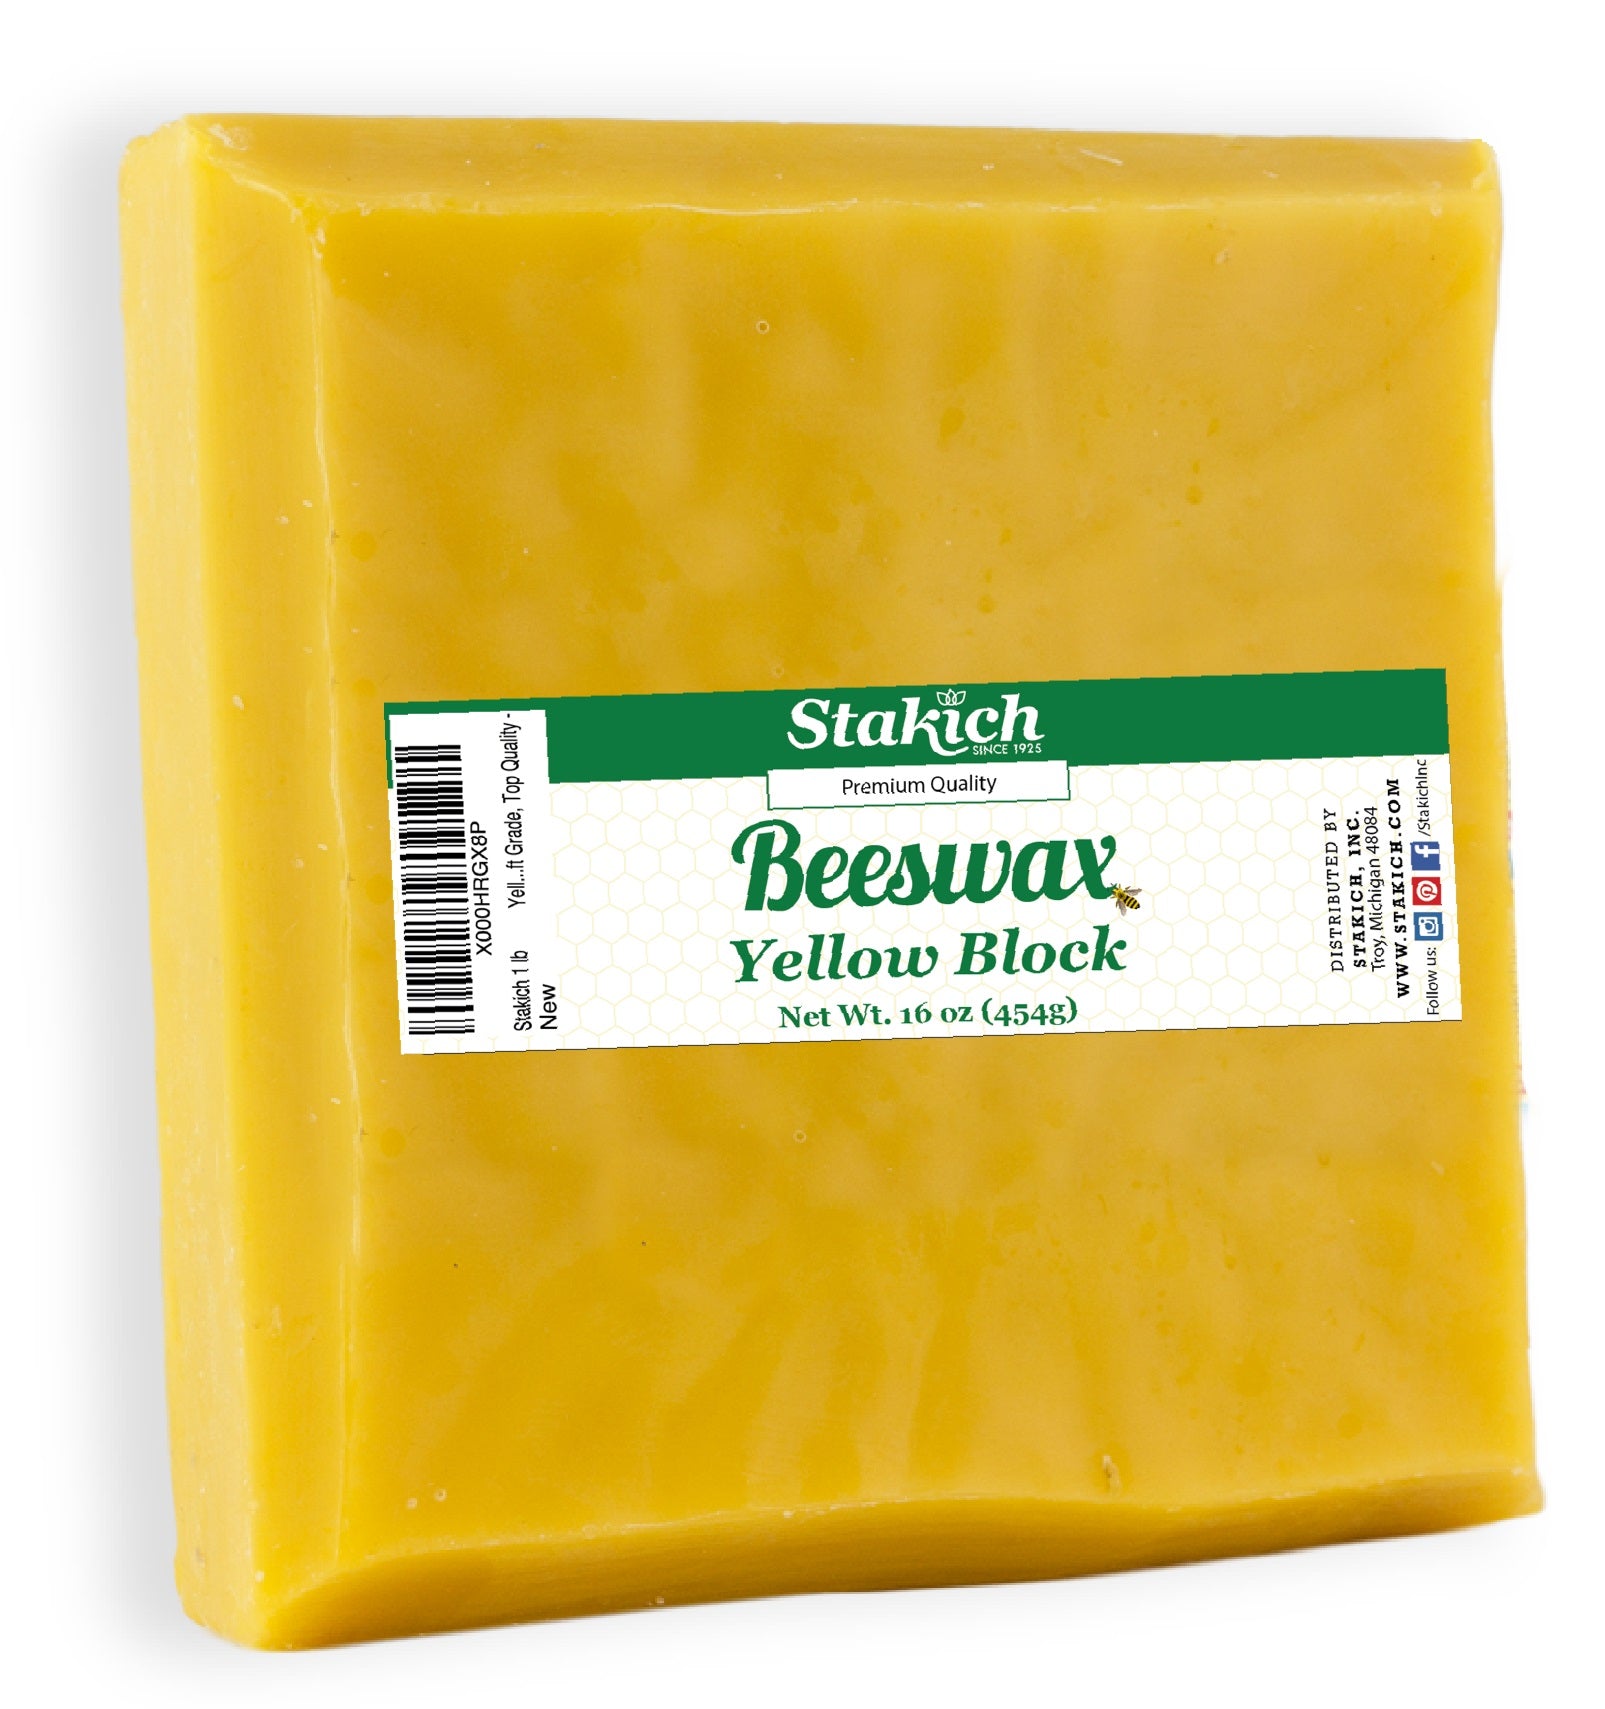 White 1 lb Beeswax Blocks For Sale